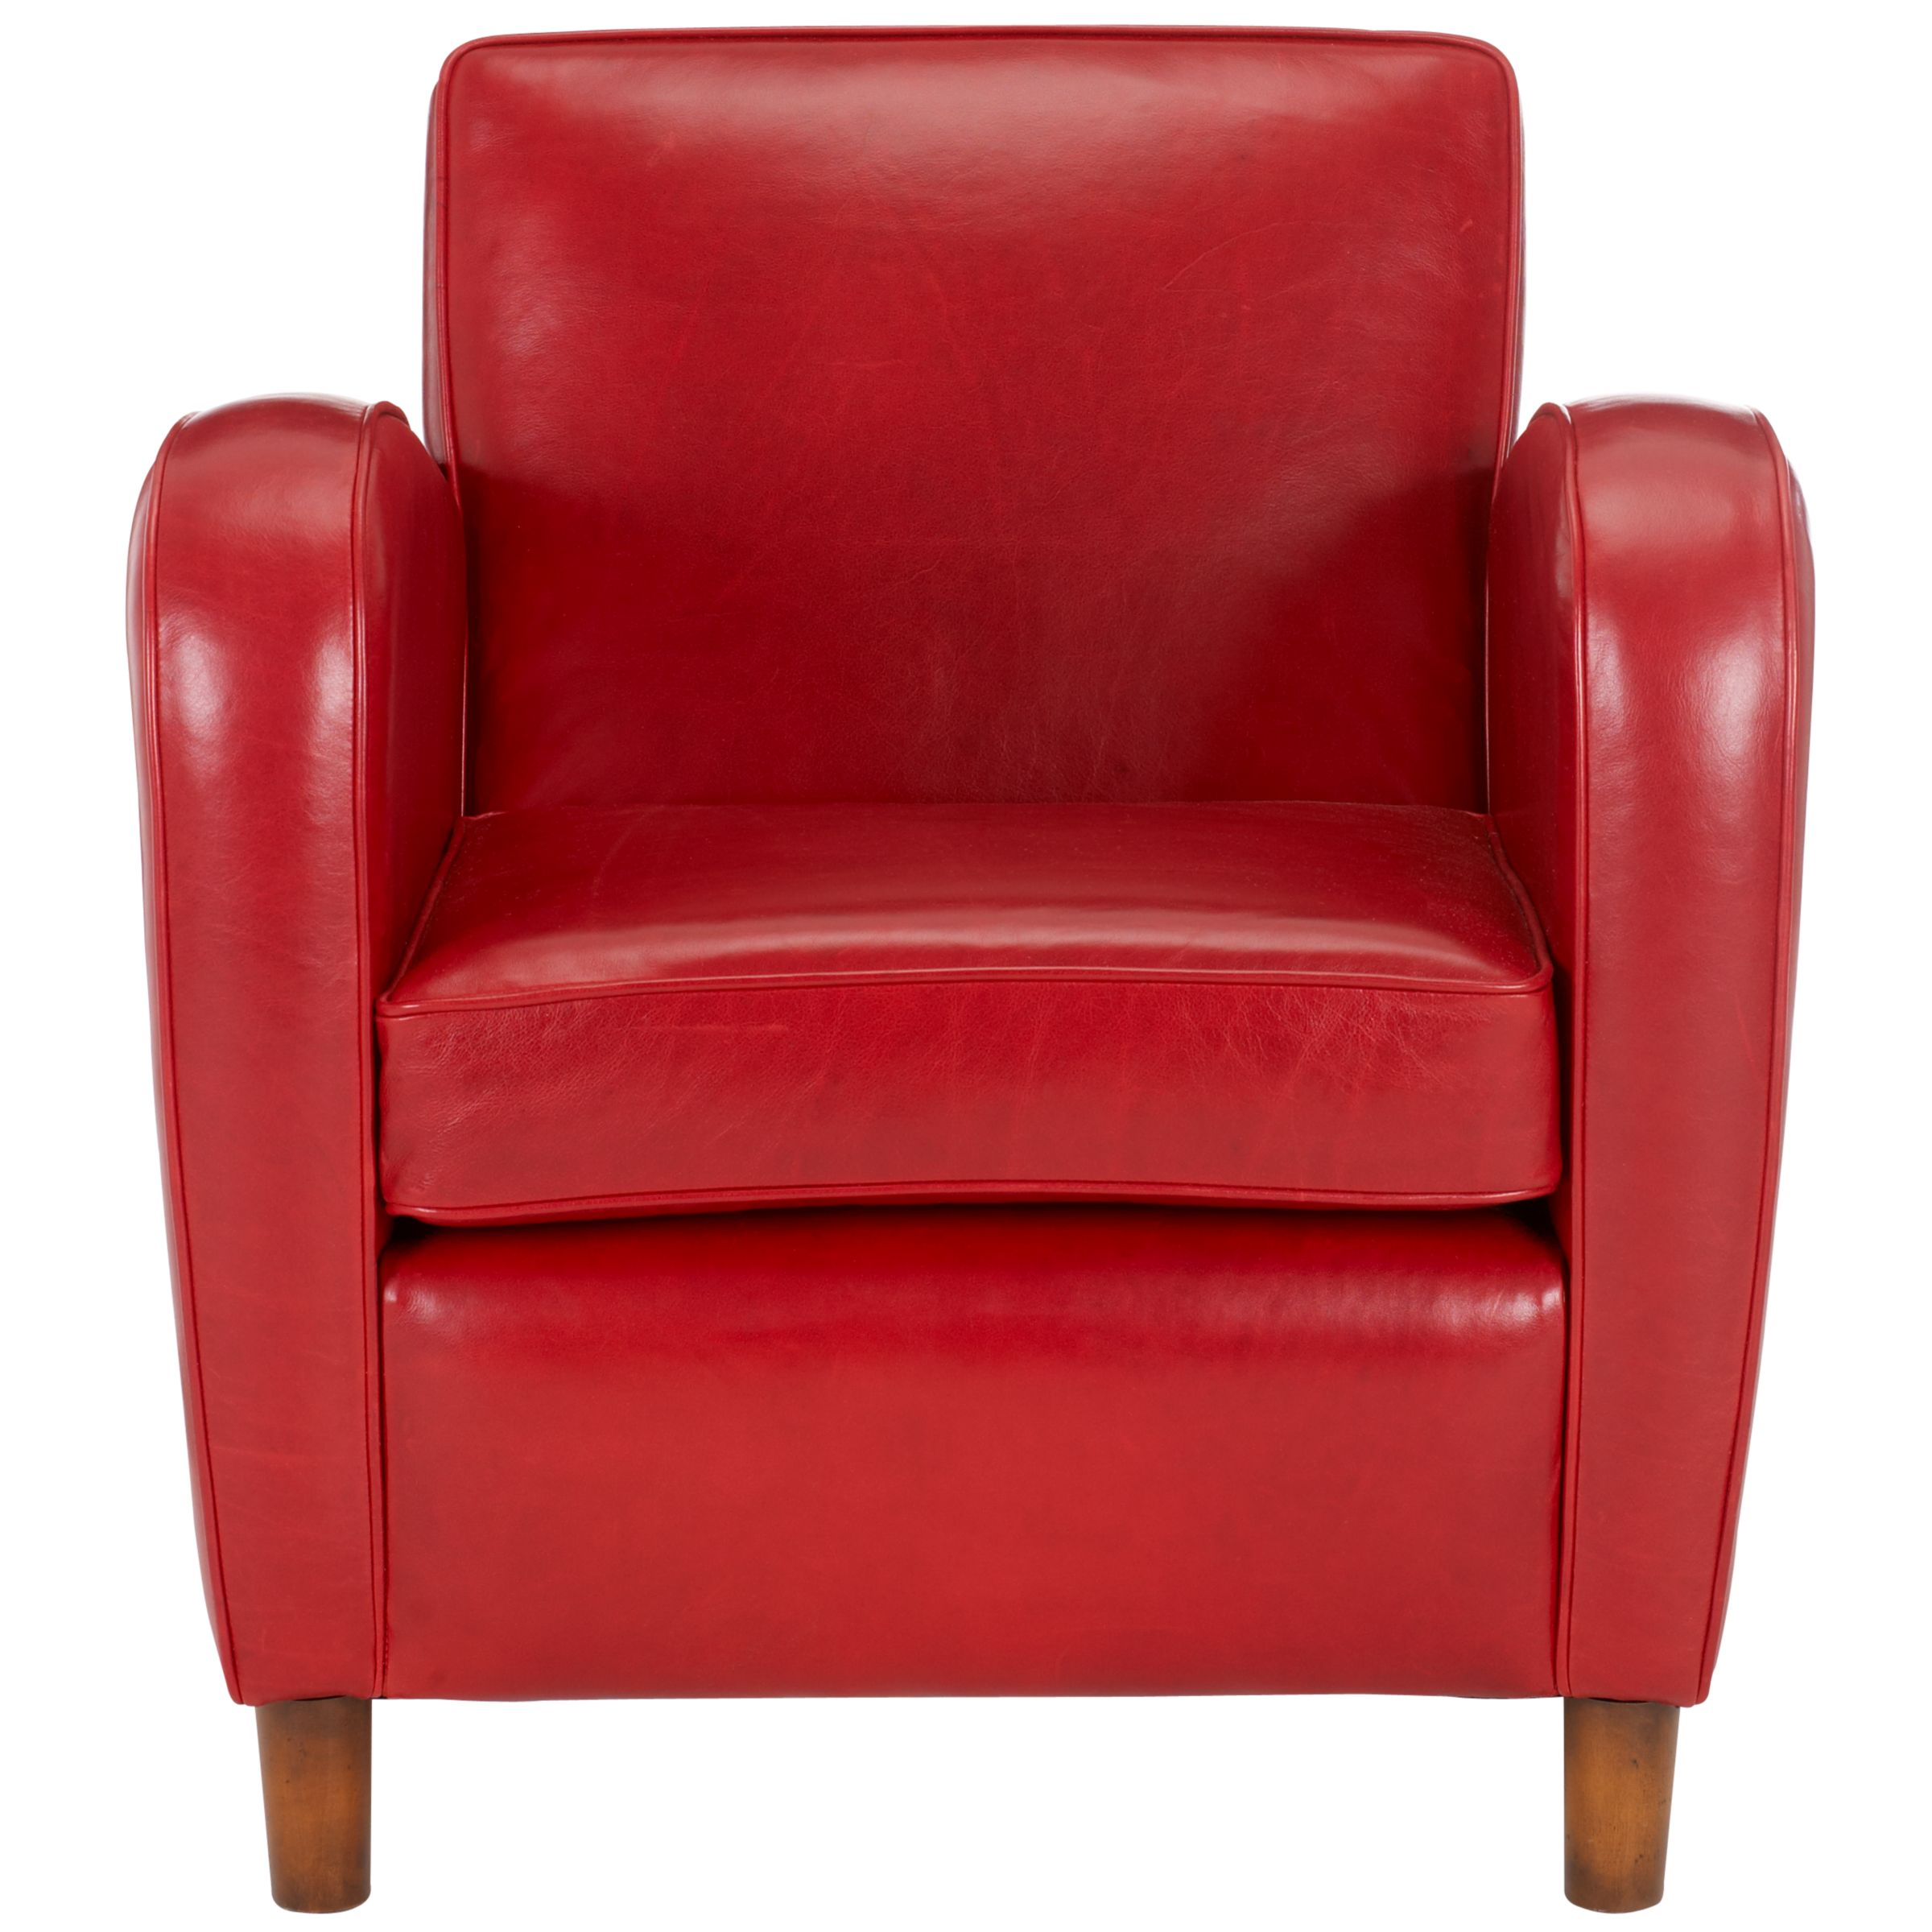 John Lewis Odeon Leather Chair, Artisano Red Hide at JohnLewis